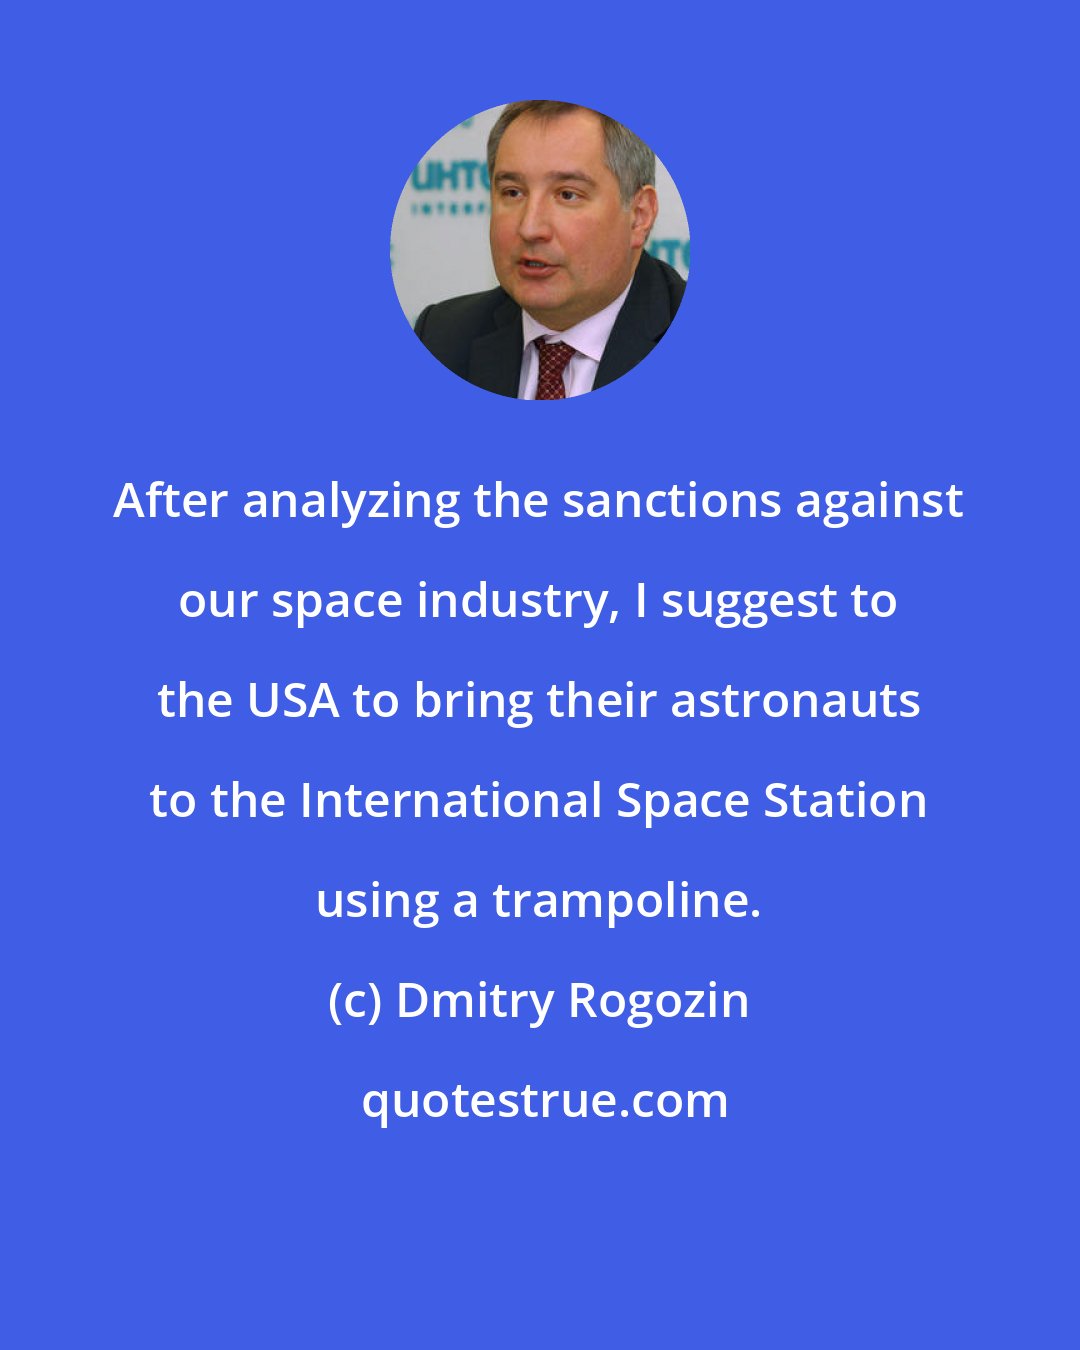 Dmitry Rogozin: After analyzing the sanctions against our space industry, I suggest to the USA to bring their astronauts to the International Space Station using a trampoline.